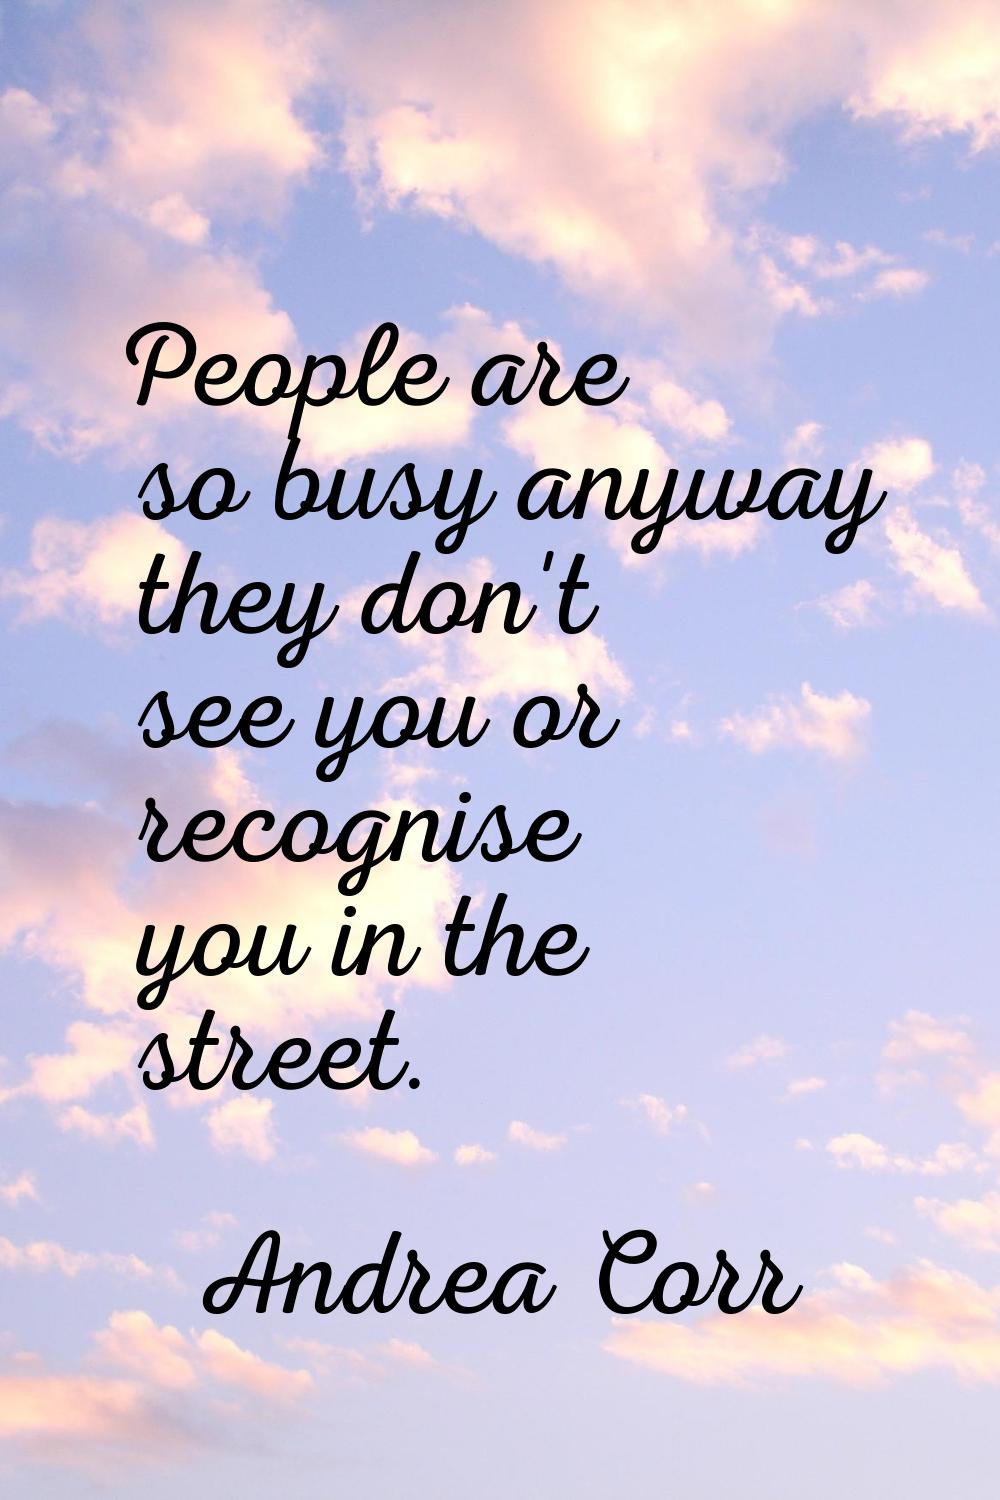 People are so busy anyway they don't see you or recognise you in the street.